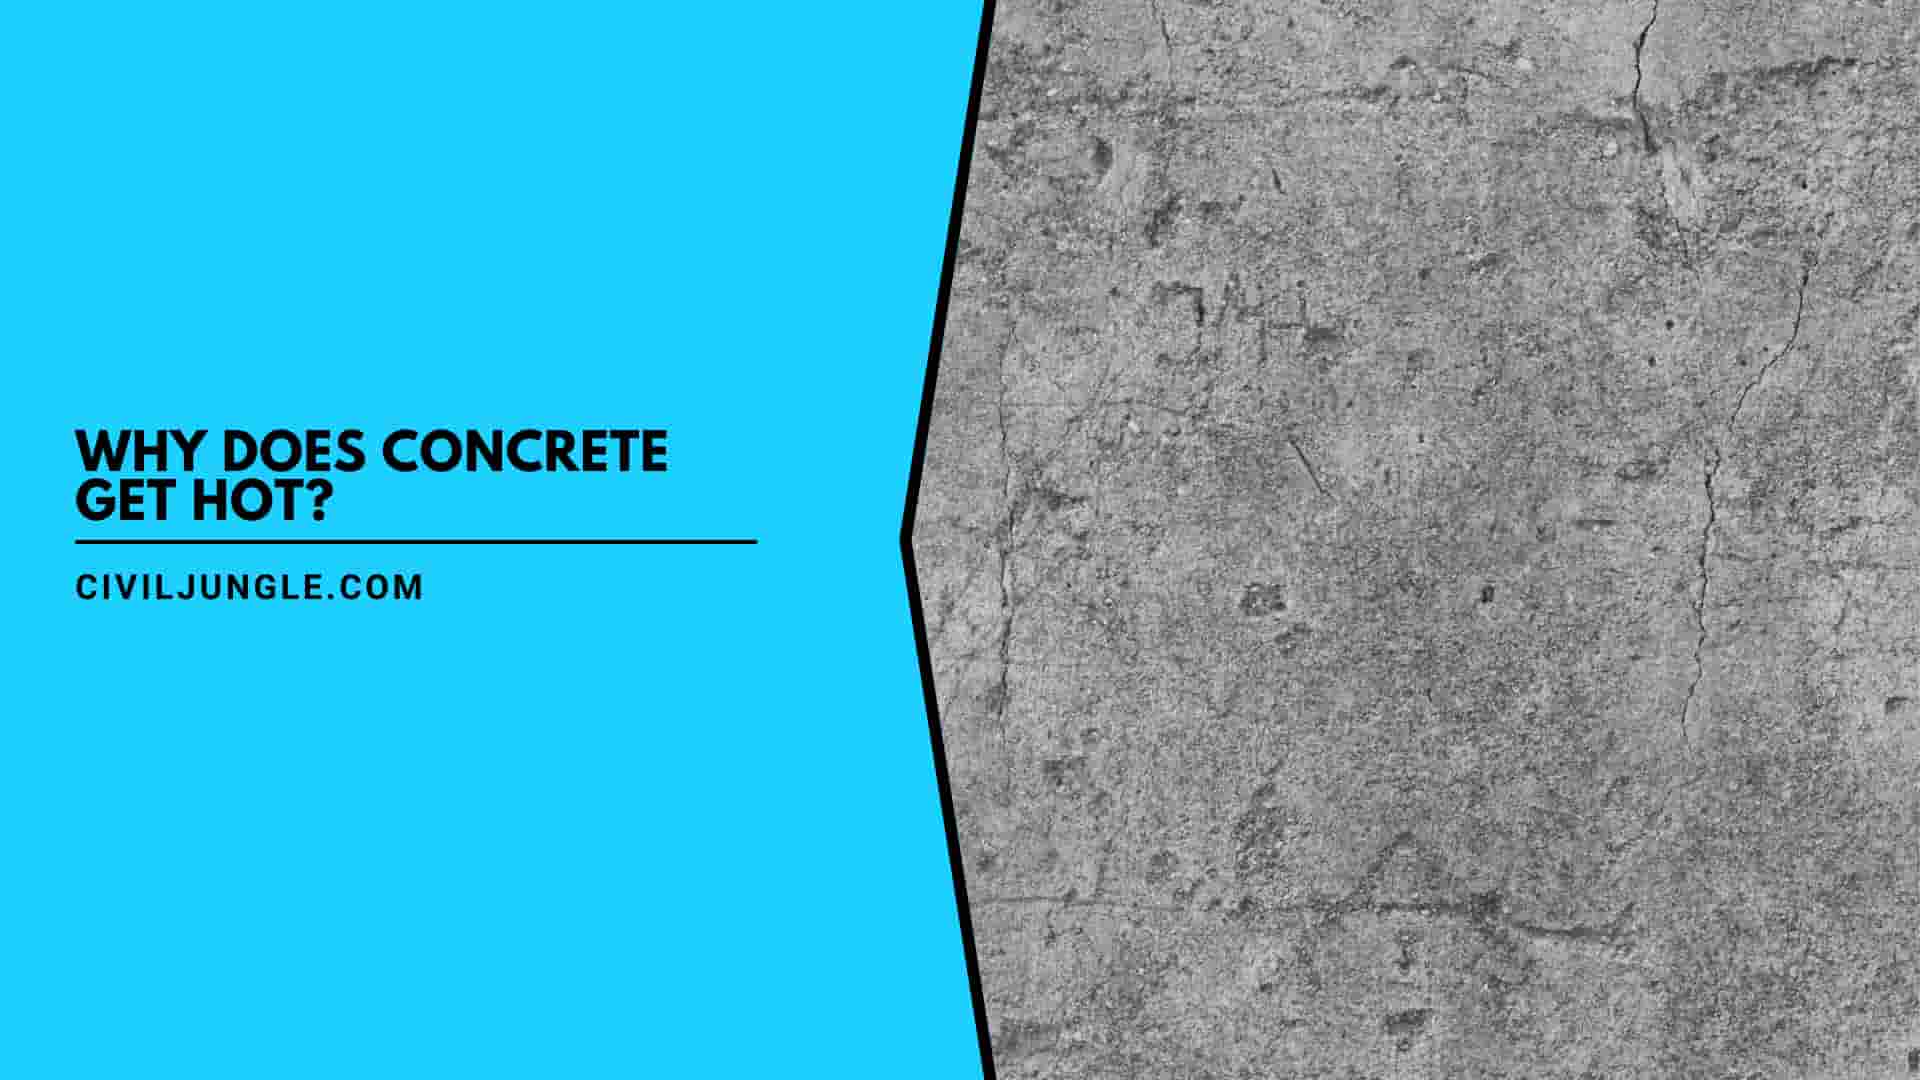 Why Does Concrete Get Hot?